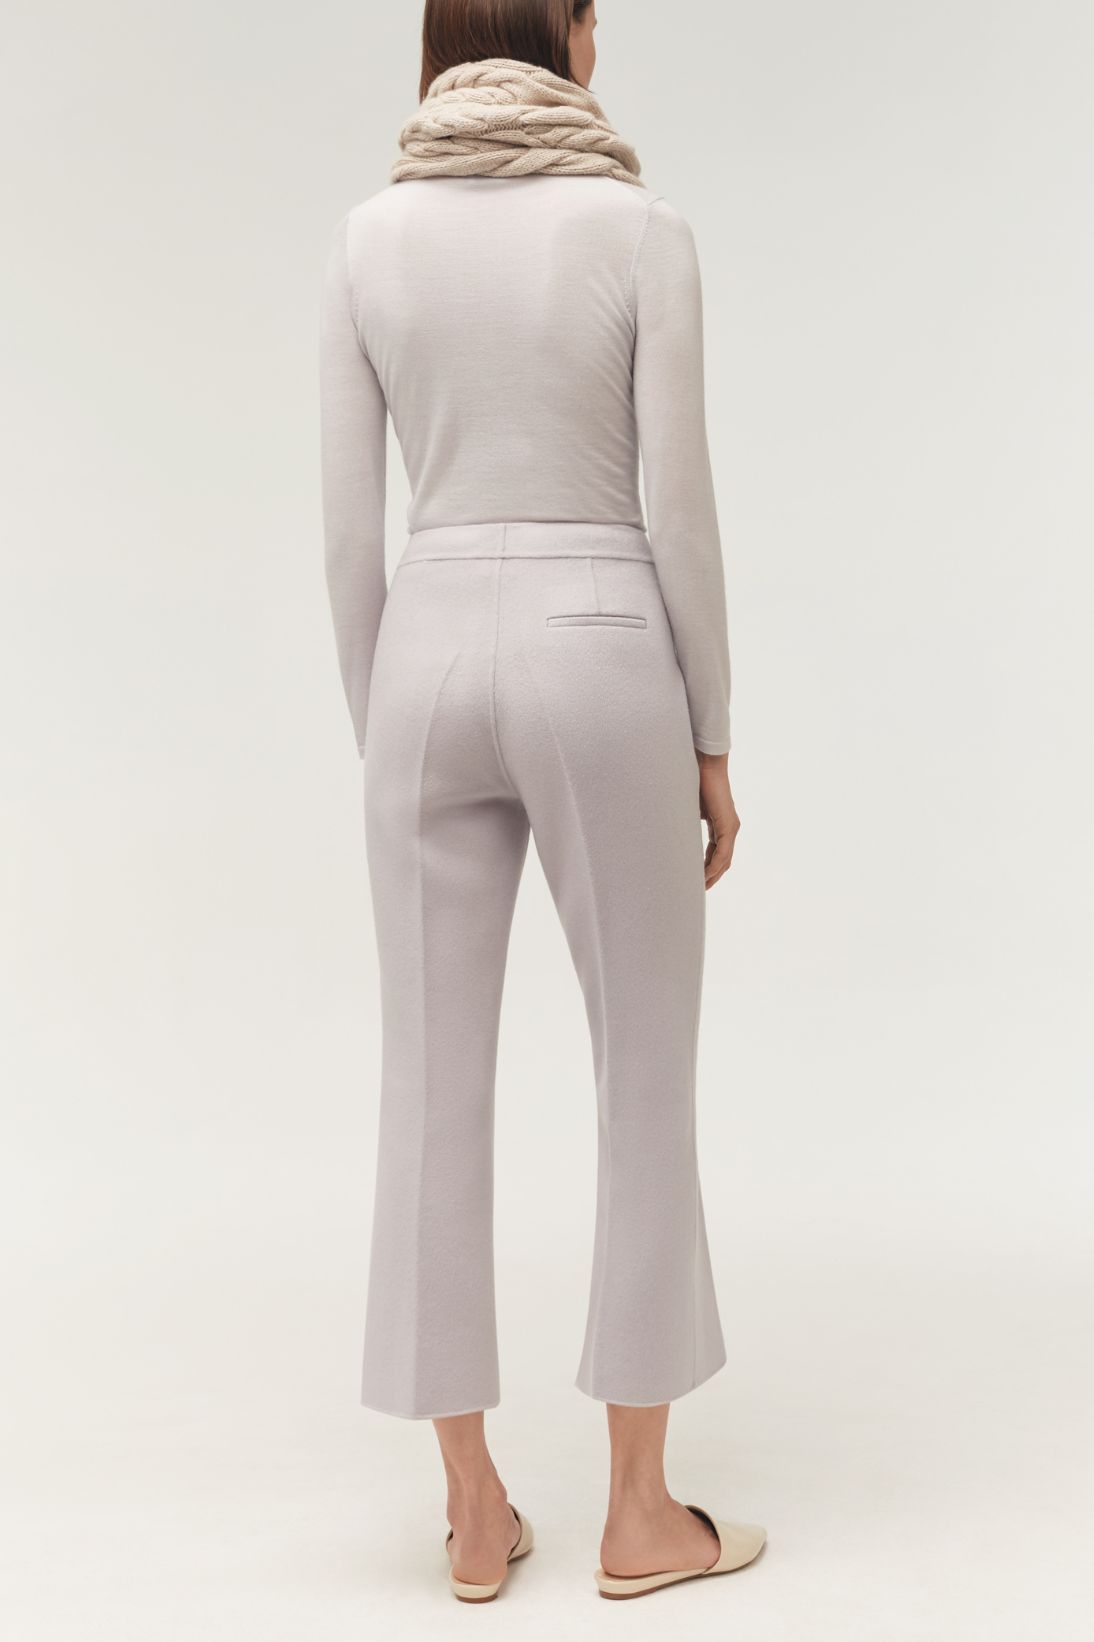 CROPPED PANT WITH A-LINE HEM